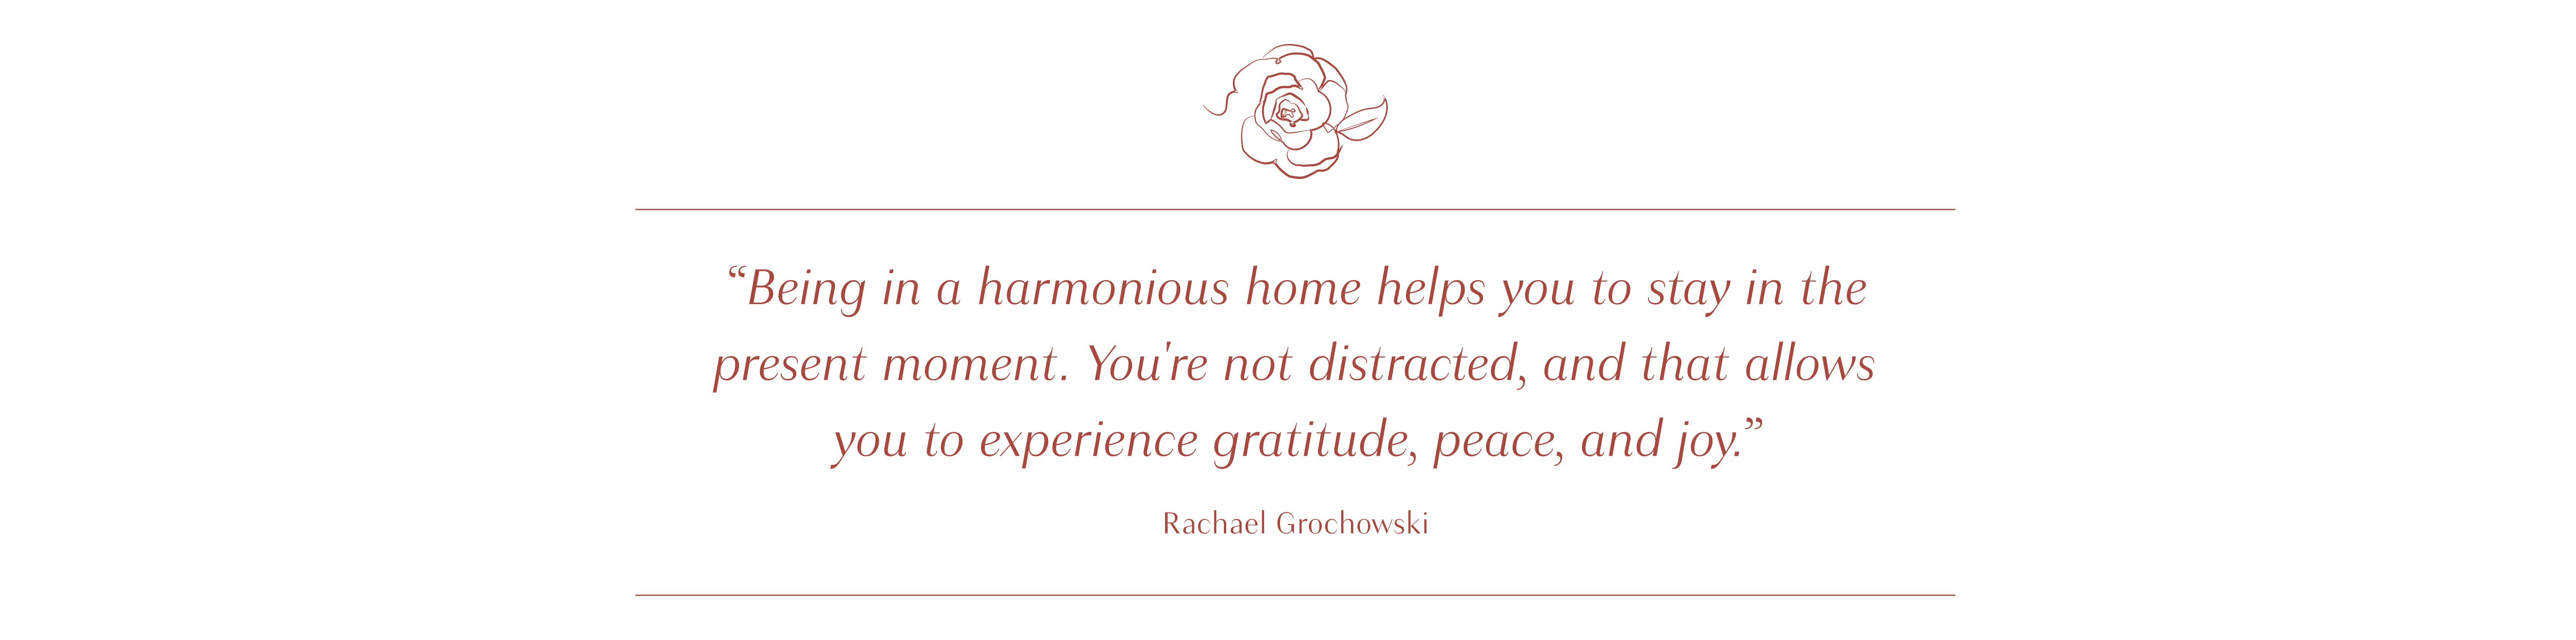 Being in a harmonious home helps you to stay in the present moment. You're not distracted, and that allows you to experience gratitude, peace, and joy. - Rachel Grochowski - small